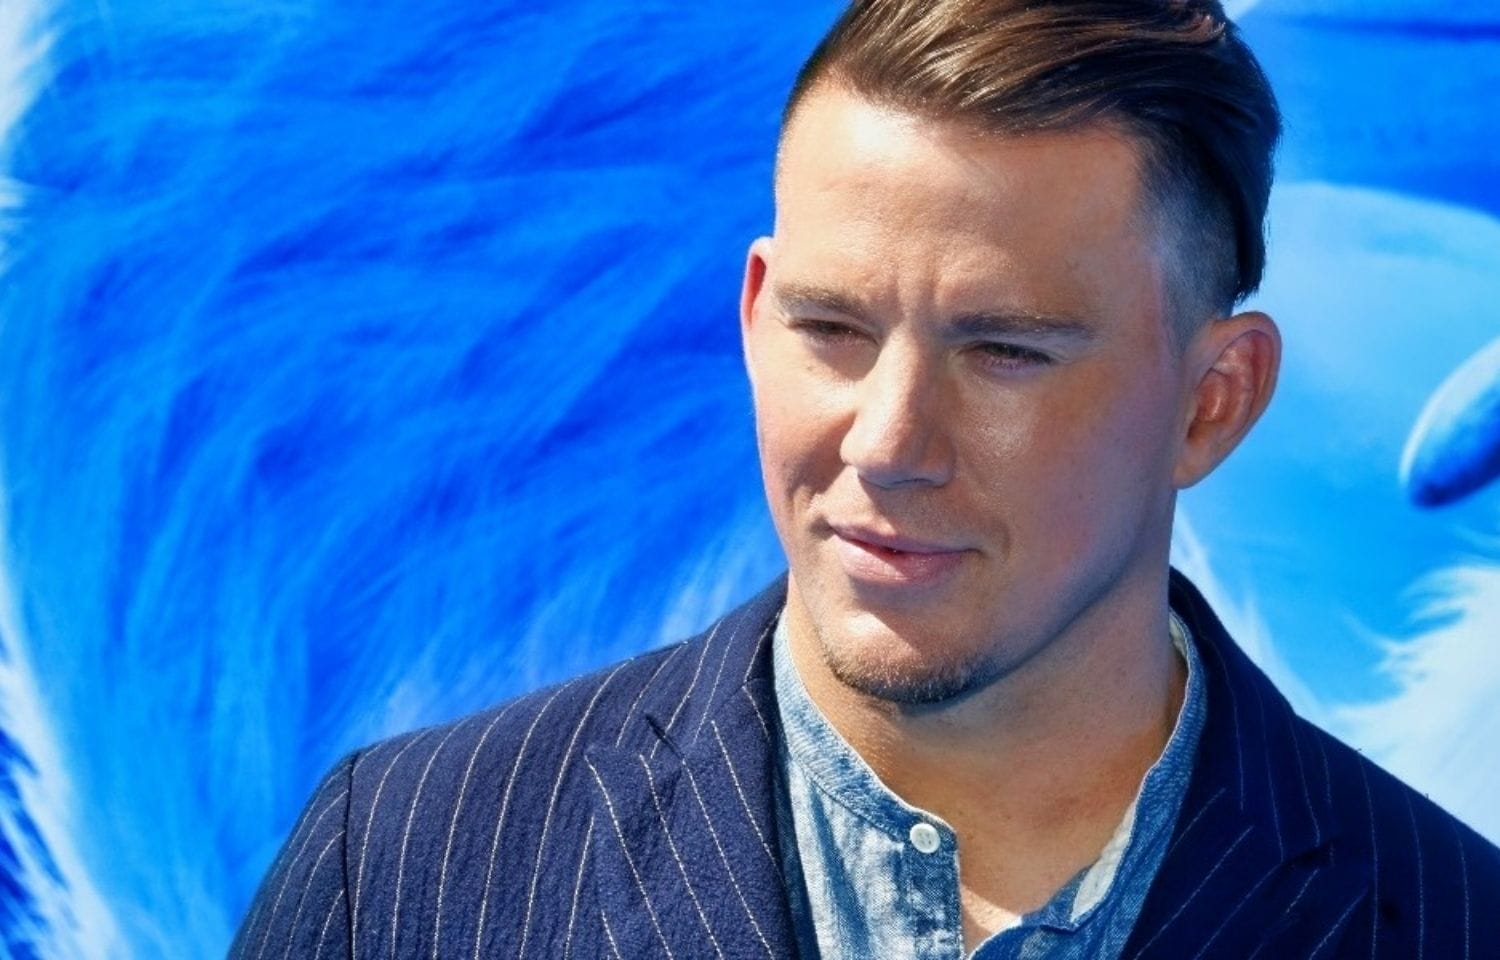 Is Channing Tatum Gay, Bisexual or Queer?